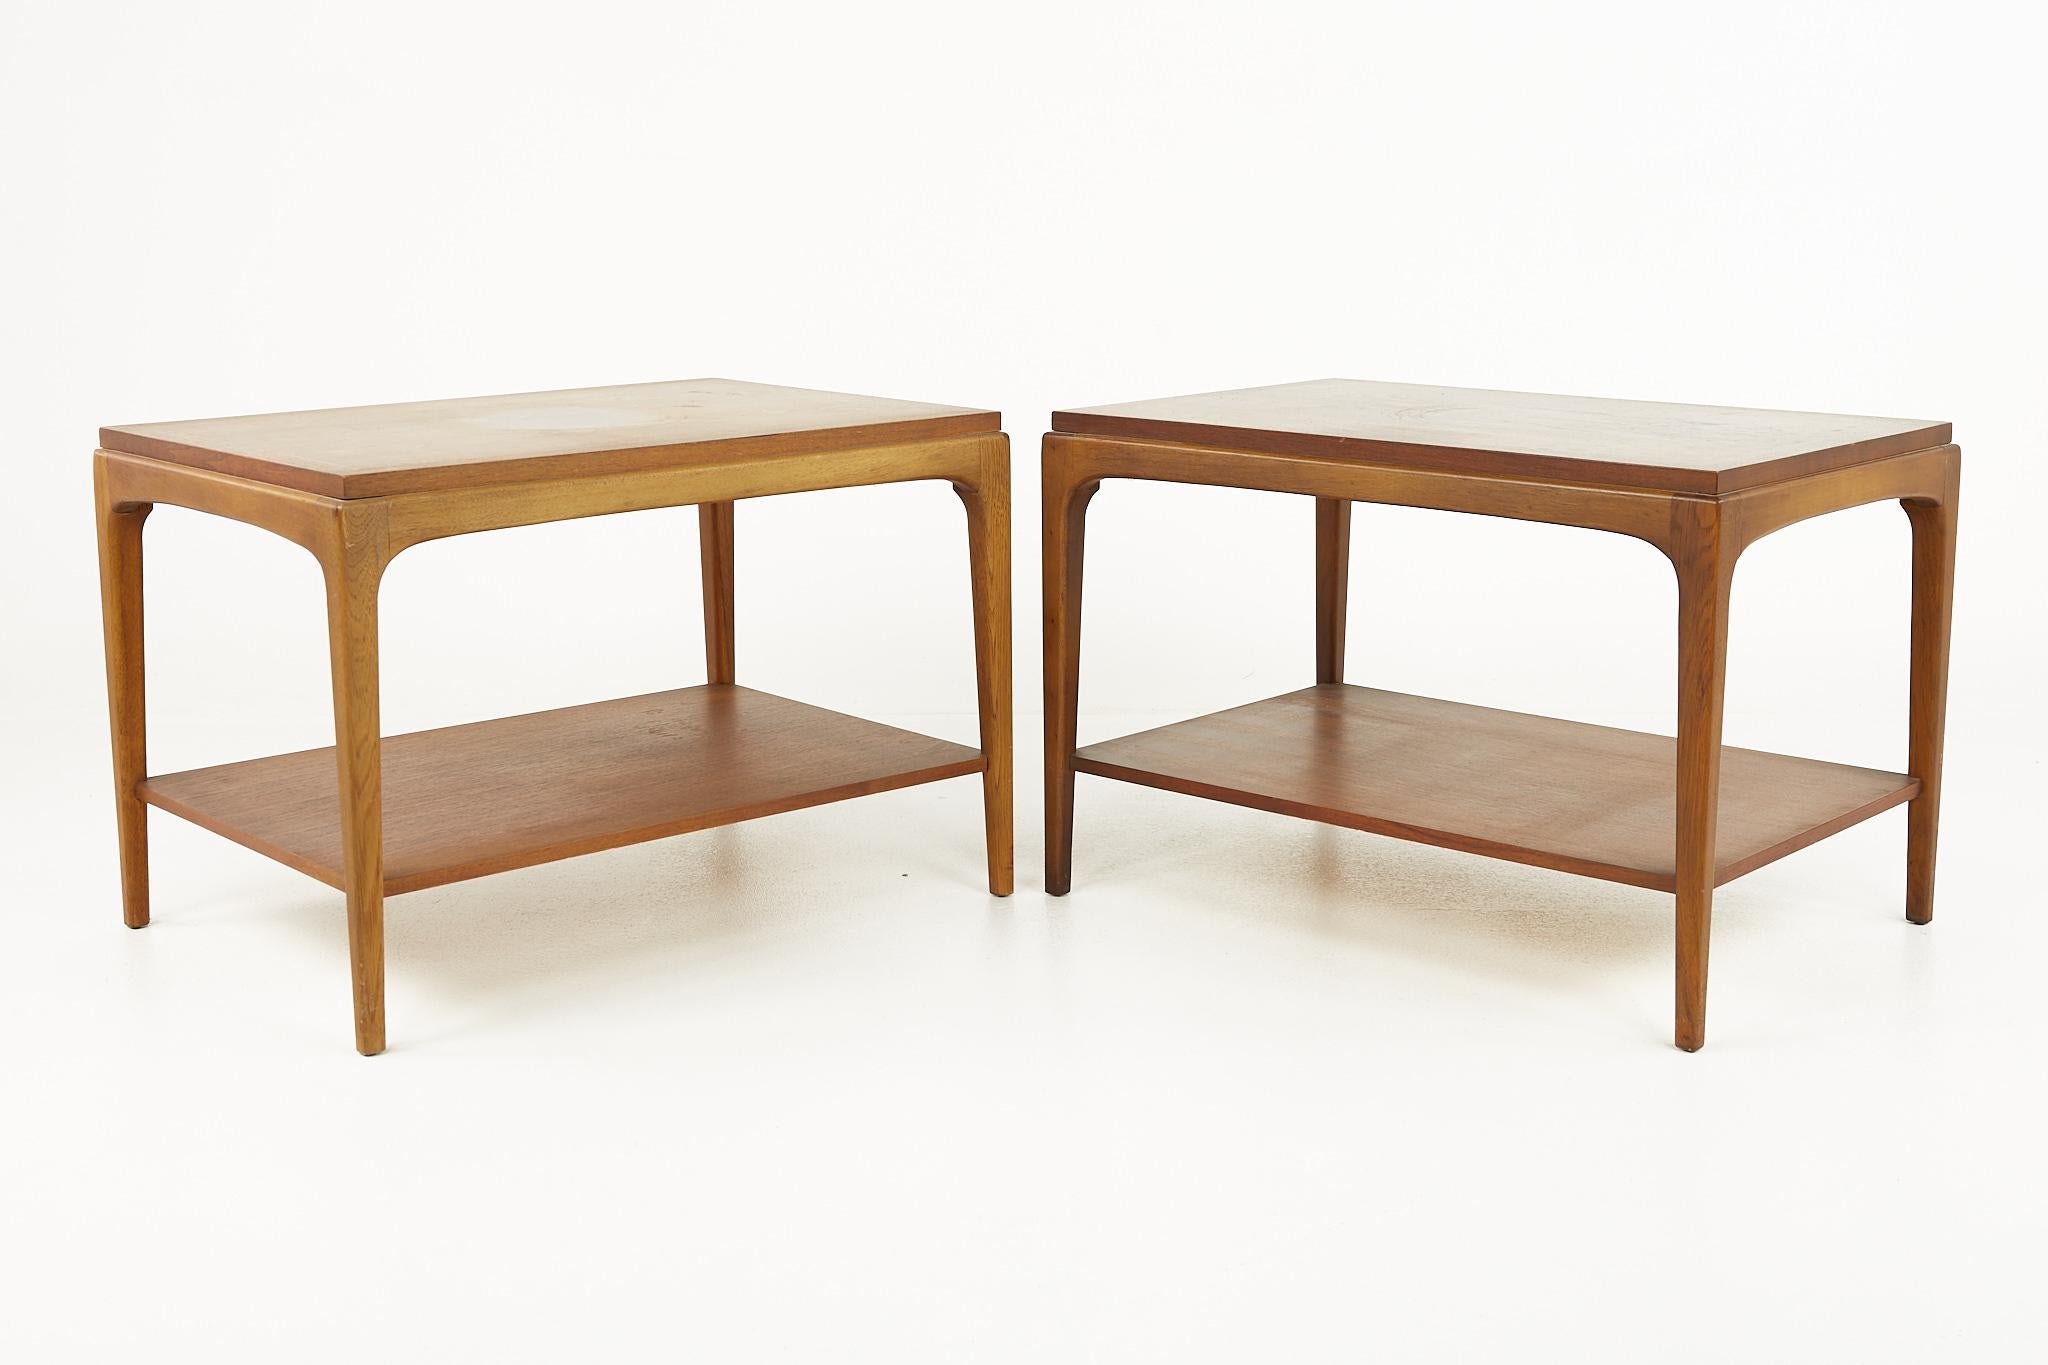 Lane rhythm mid century walnut side end tables - pair

Each table measures: 30 wide x 21 deep x 20.5 inches high

All pieces of furniture can be had in what we call restored vintage condition. That means the piece is restored upon purchase so